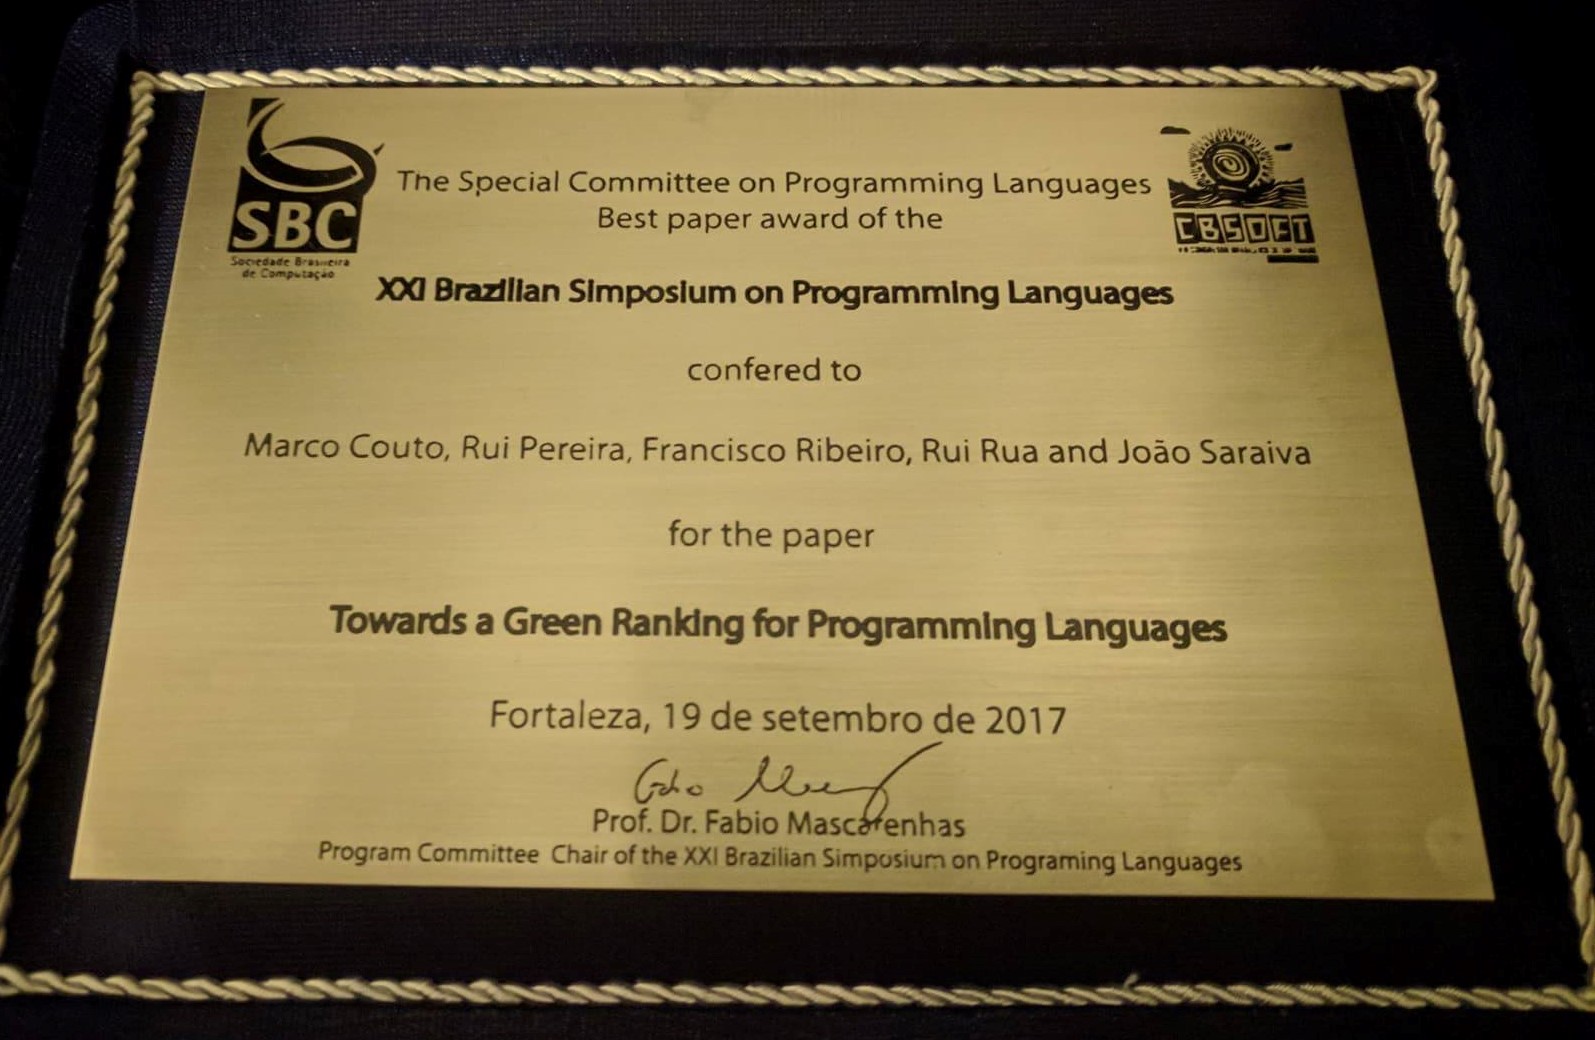 Paper on energy efficiency in programming languages receives Best Paper Award